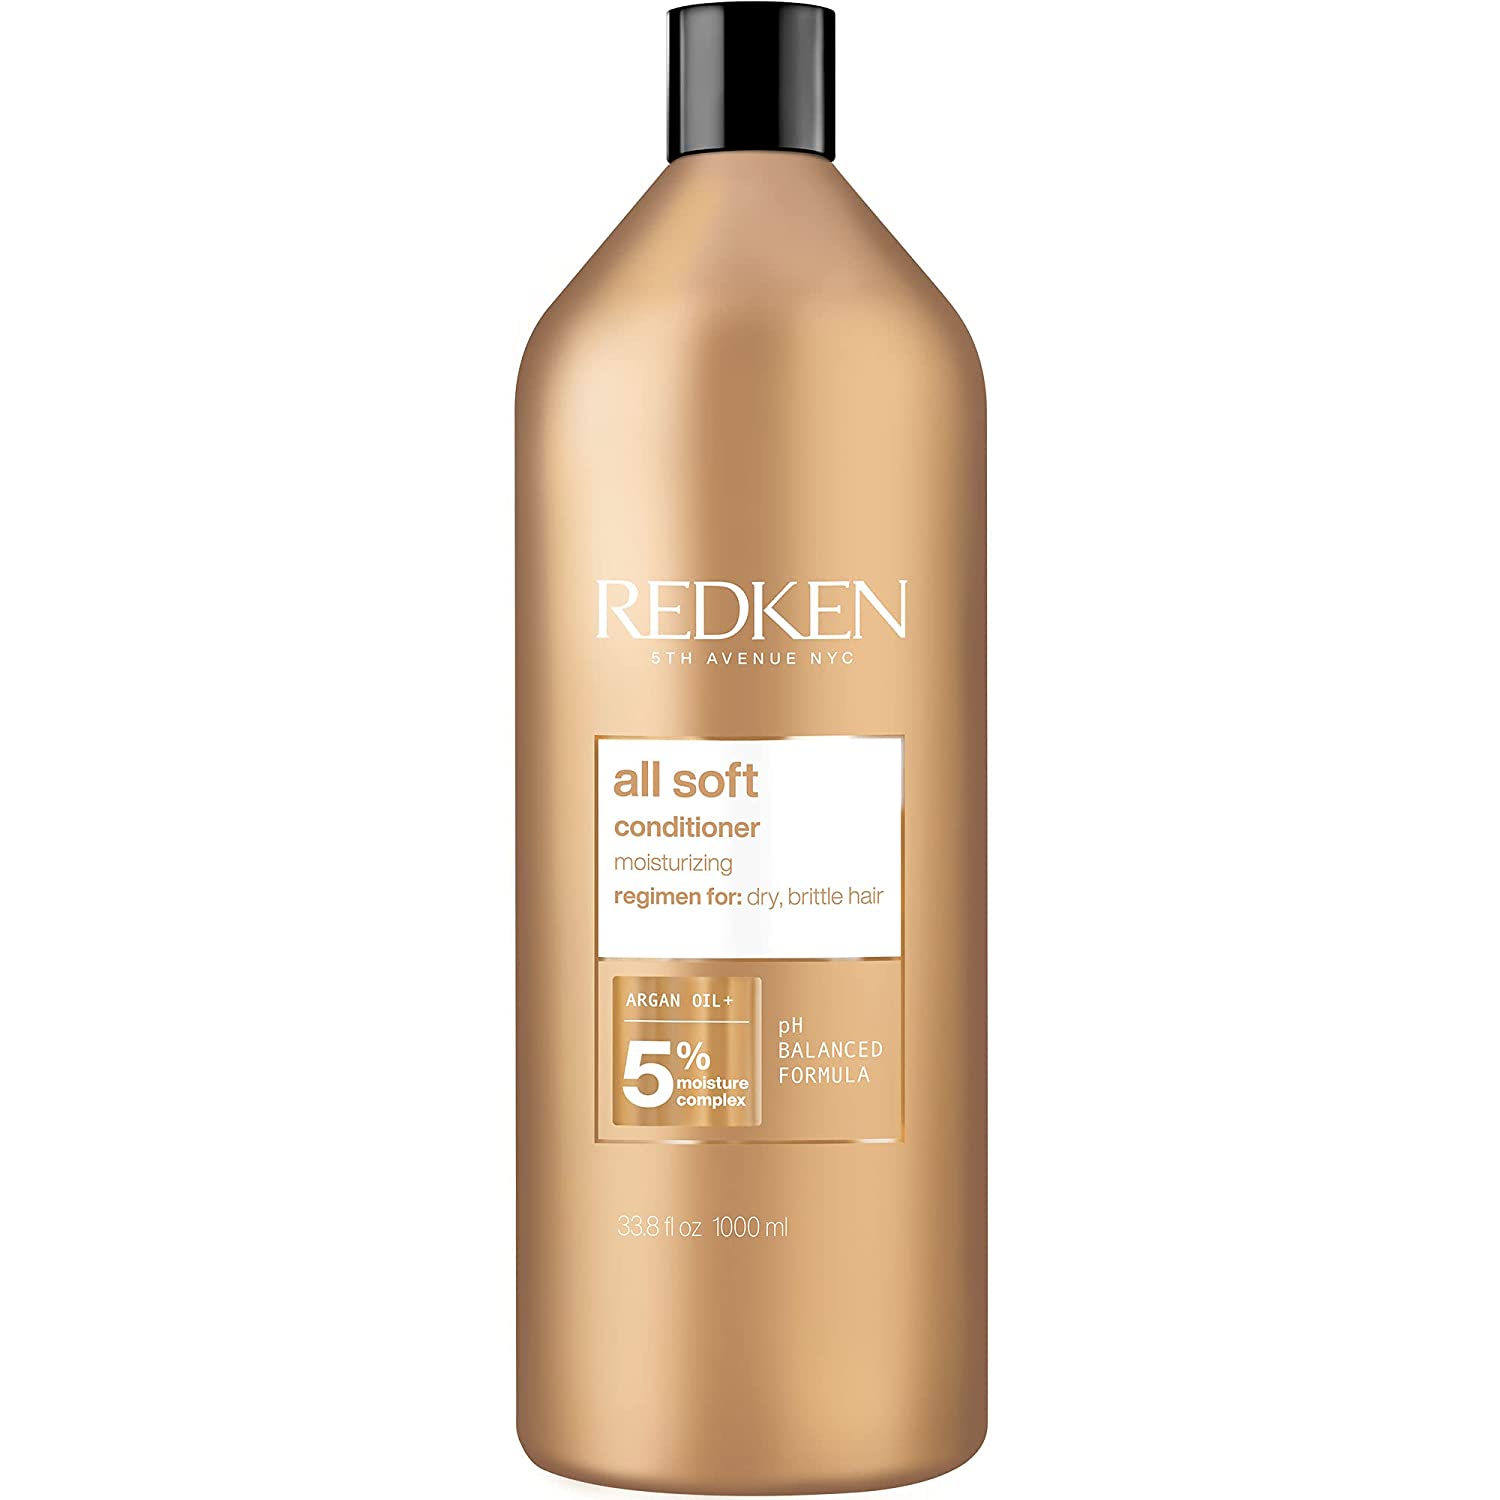 Redken All Soft Conditioner 1Litre 1L - For Dry/Brittle Hair - Moisturizes & Provides Intense Softness - With Argan Oil